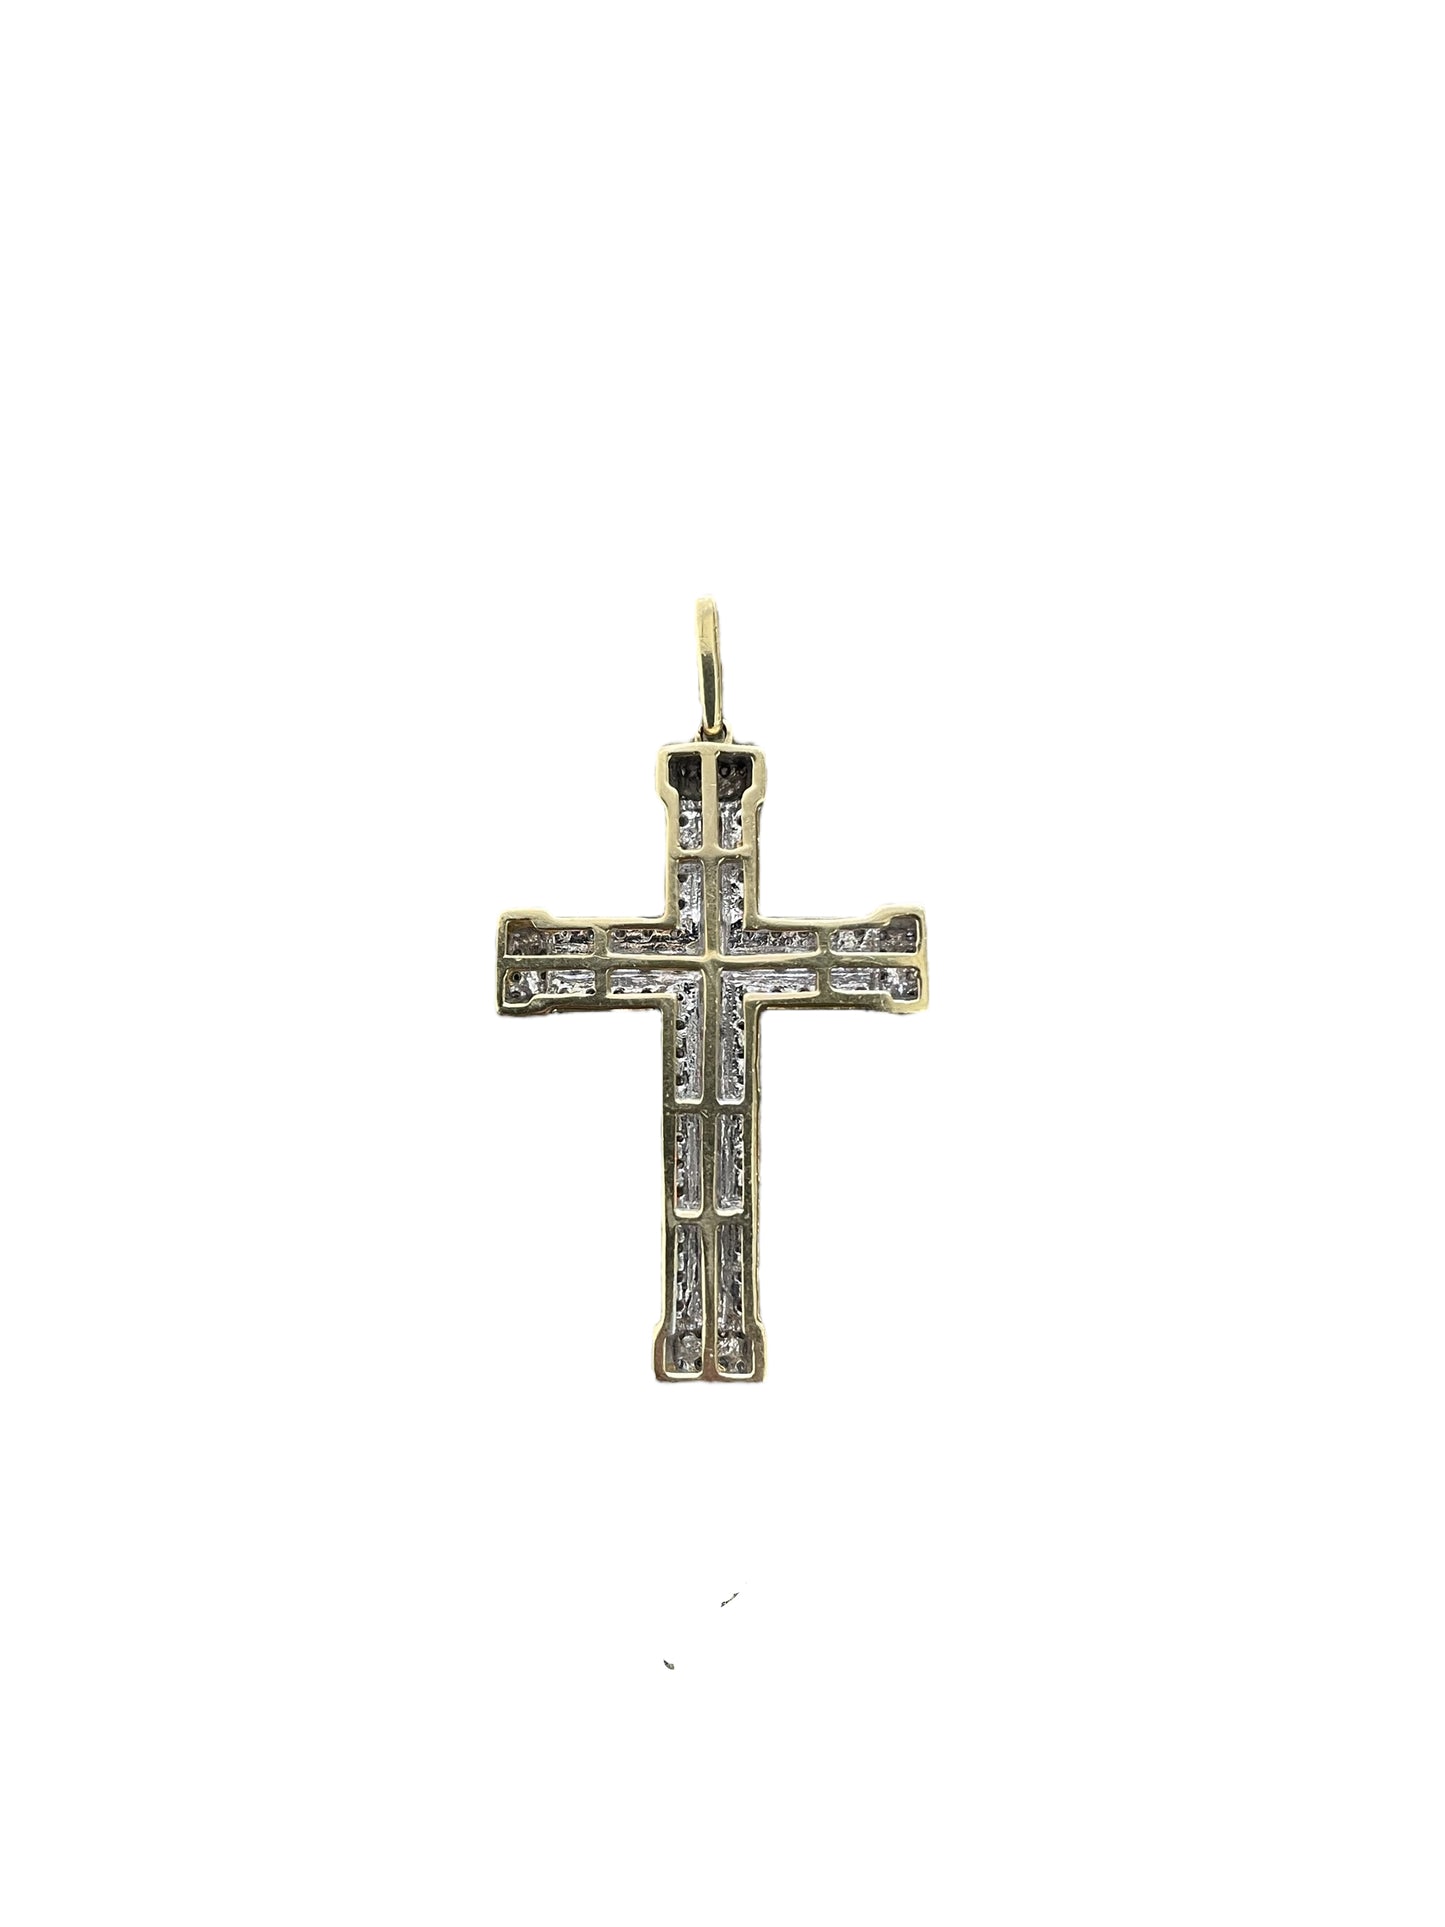 14K Yellow Gold Diamond Cross Charm (6.2 Grams) (Local Pick-up only)